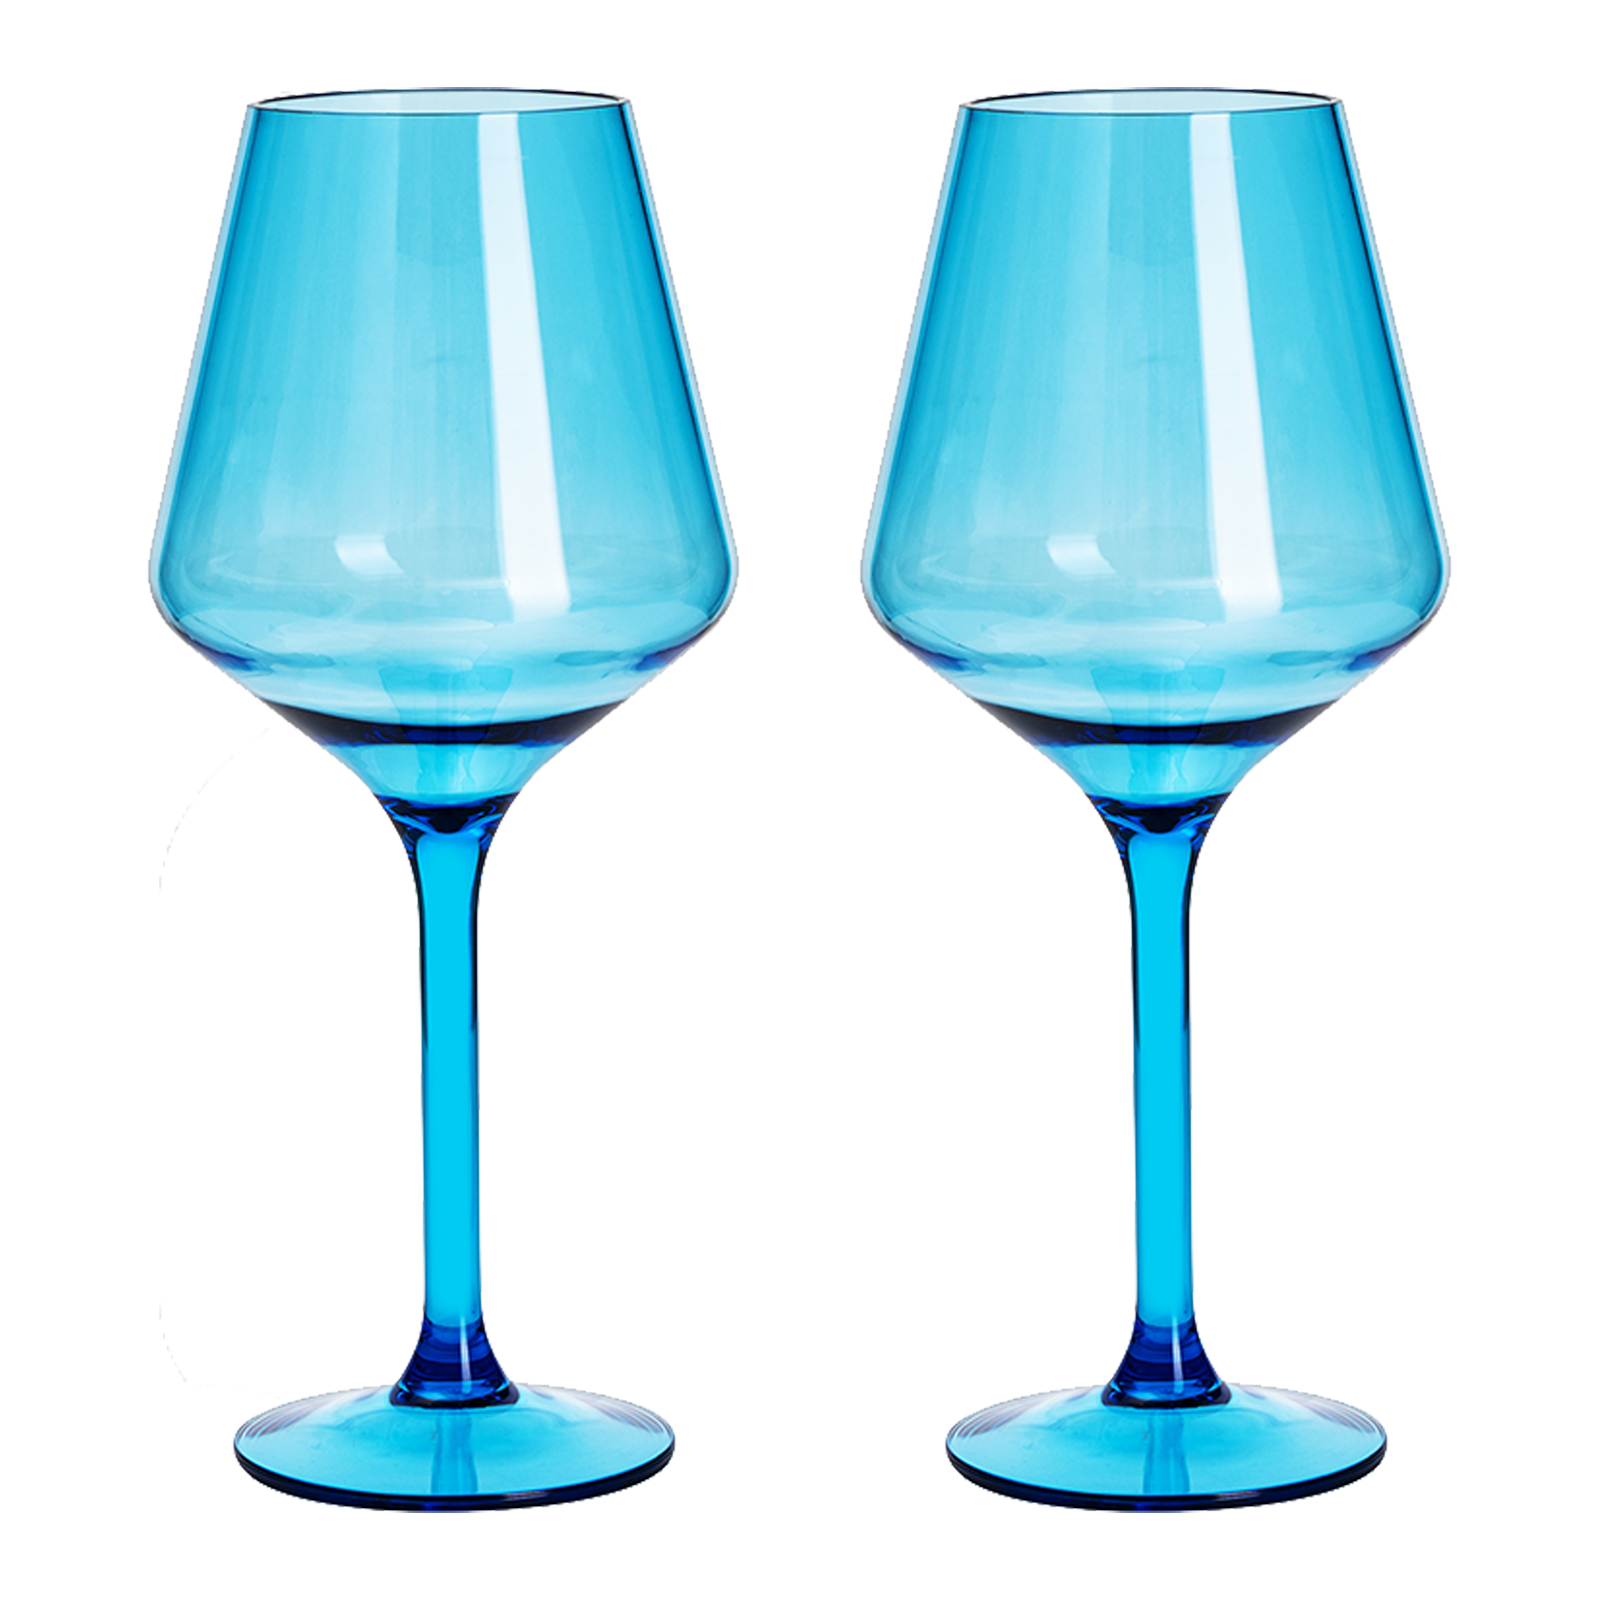 The Beach Glass- Original Floating Acrylic Wine Glass- for  Pool, Beach, Camping, Picnic and Outdoor - Teal Tides Pack of 2: Wine  Glasses